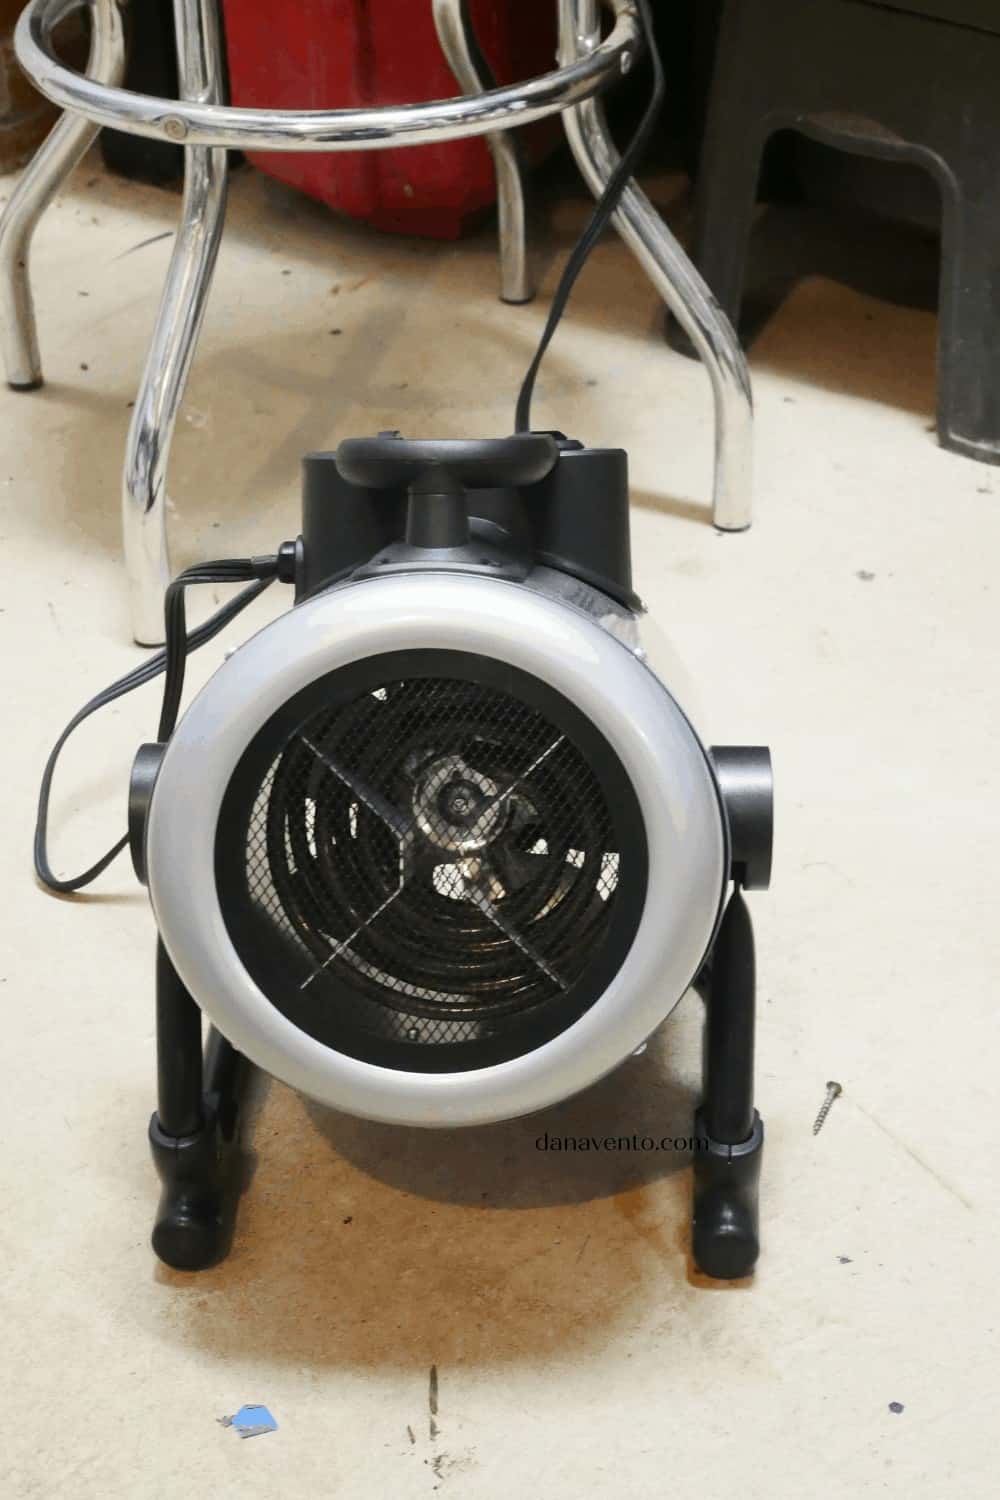 Fantastic Portable Garage Heater Under $100 That Keeps Will Warm Your Rugged Work Area Up! 